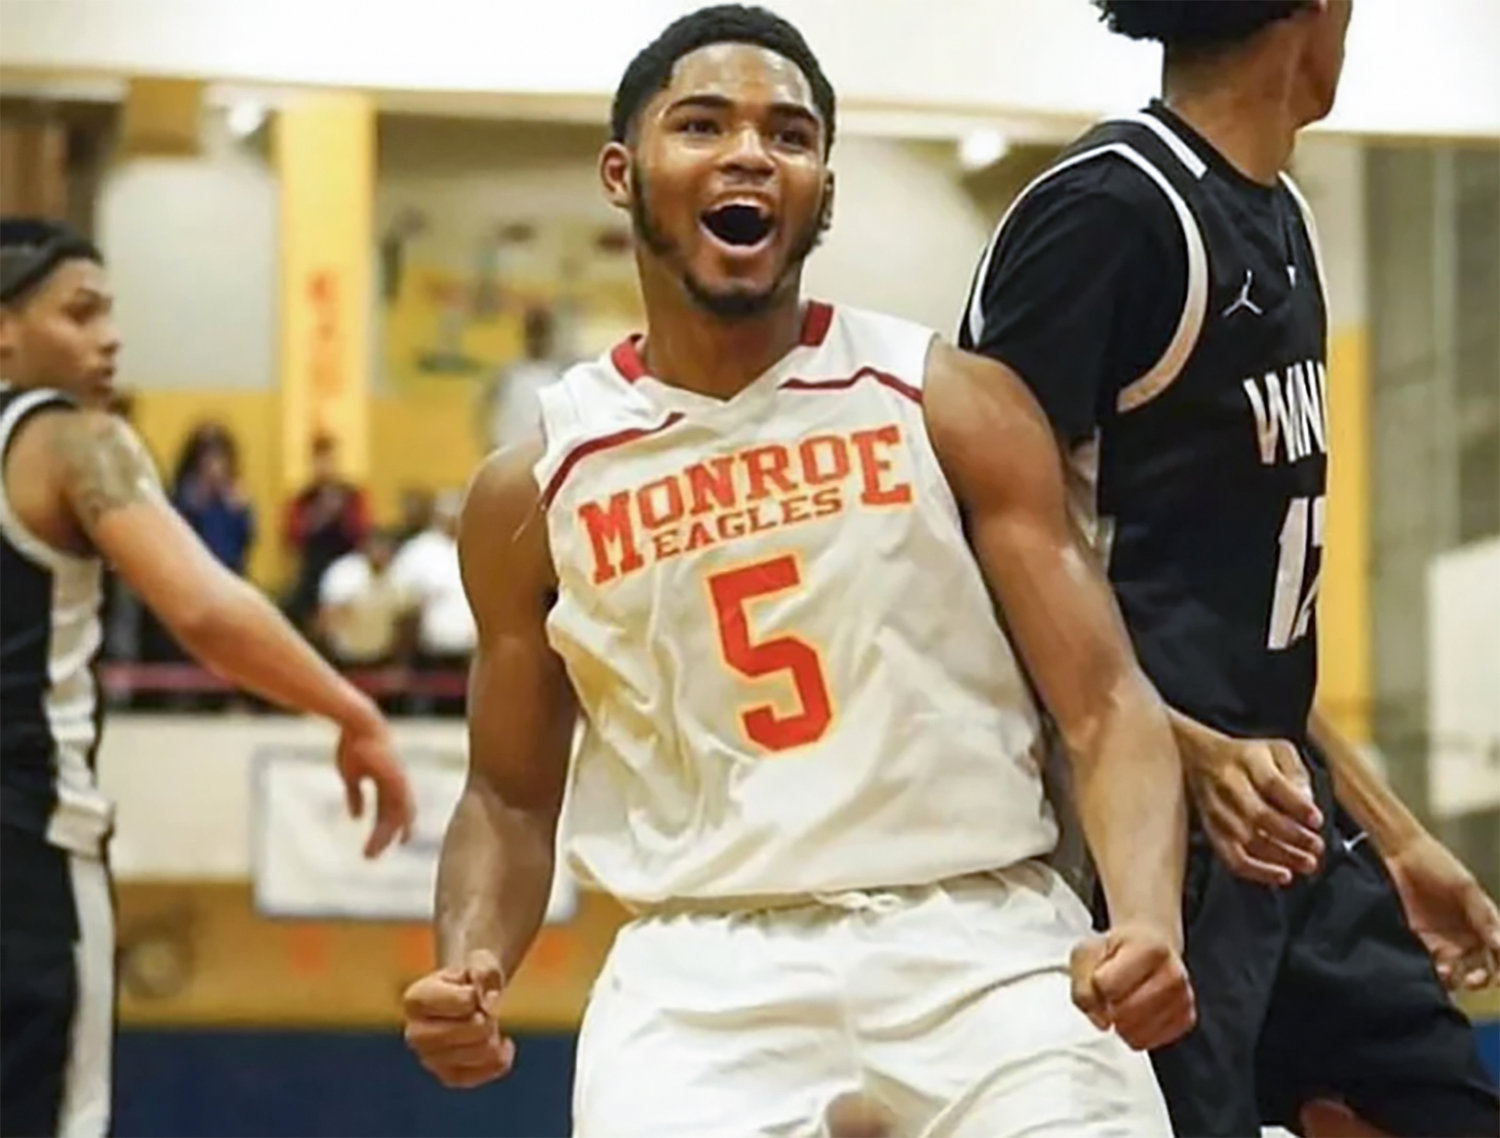 Hendricks was on the basketball team at James Monroe Campus with plans to attend St. John’s University before he was shot and killed just days before his 18th birthday. While Hendricks will never attend college, the recipients of a scholarship in his name will, including Abigail Smith and Rachel Turbridy from Celia Cruz High School of Music.